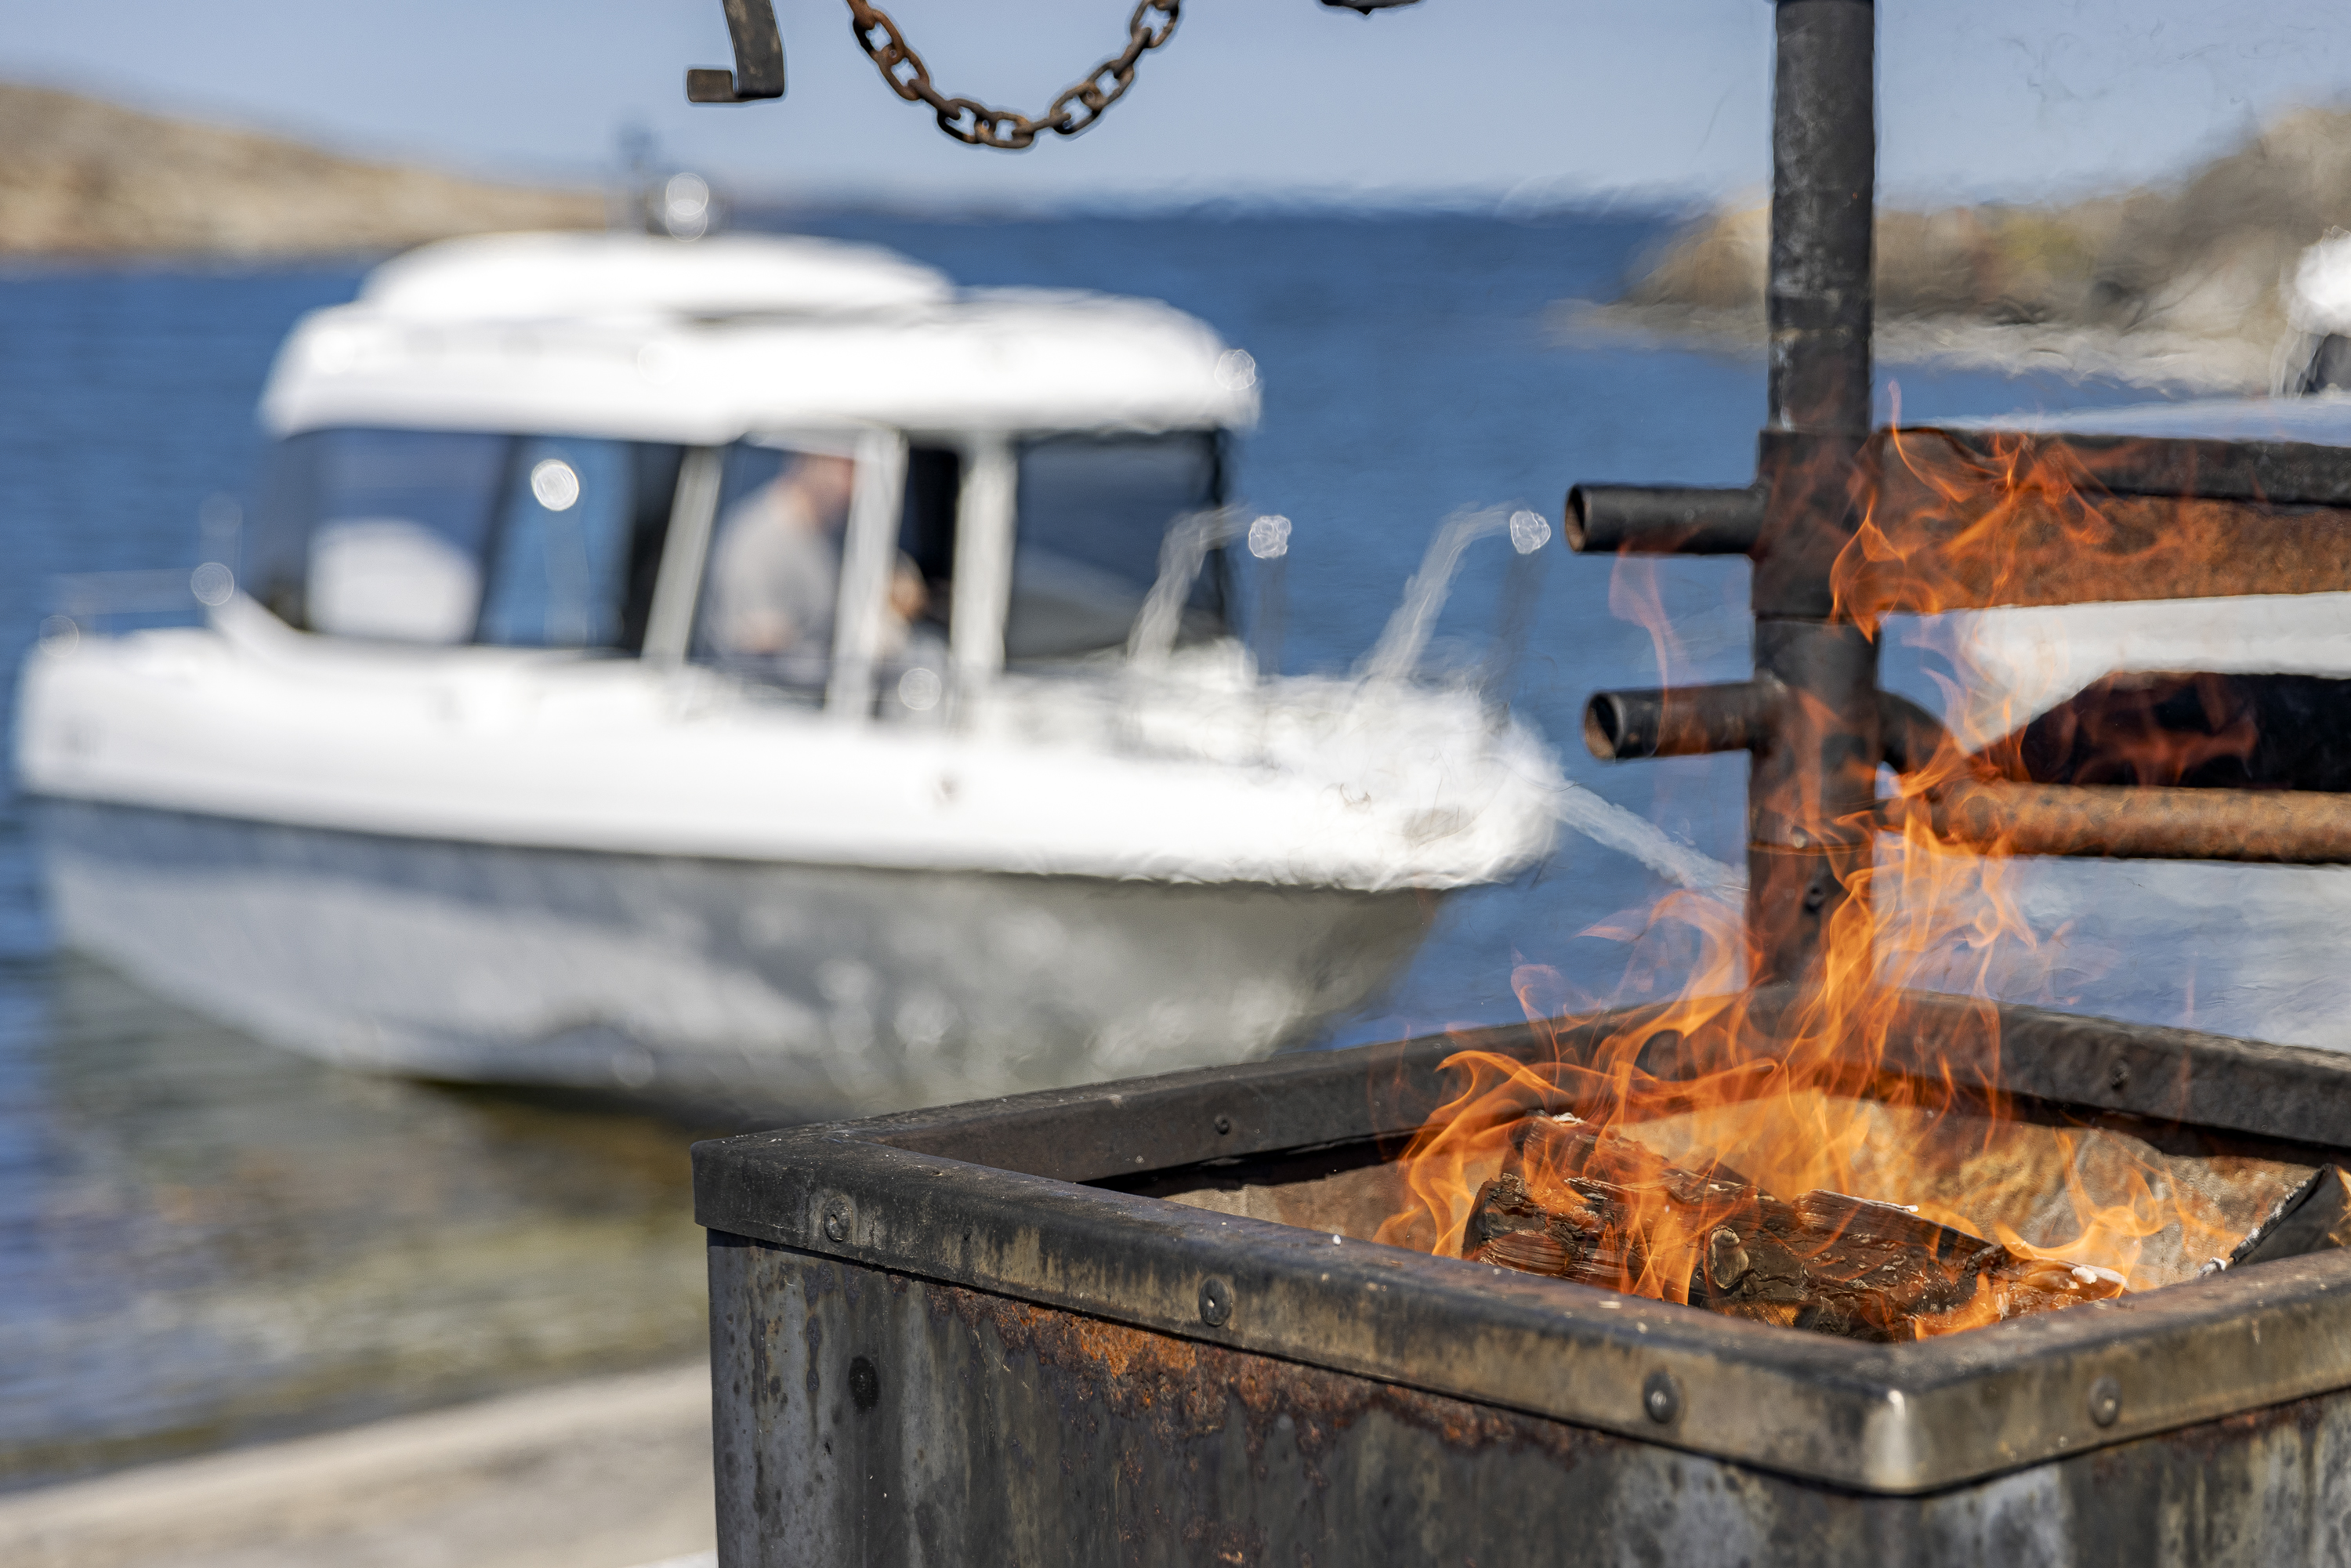 Open fire at a camping site in the Finnish archipelago. TG 6.9 cabin boat in the background.